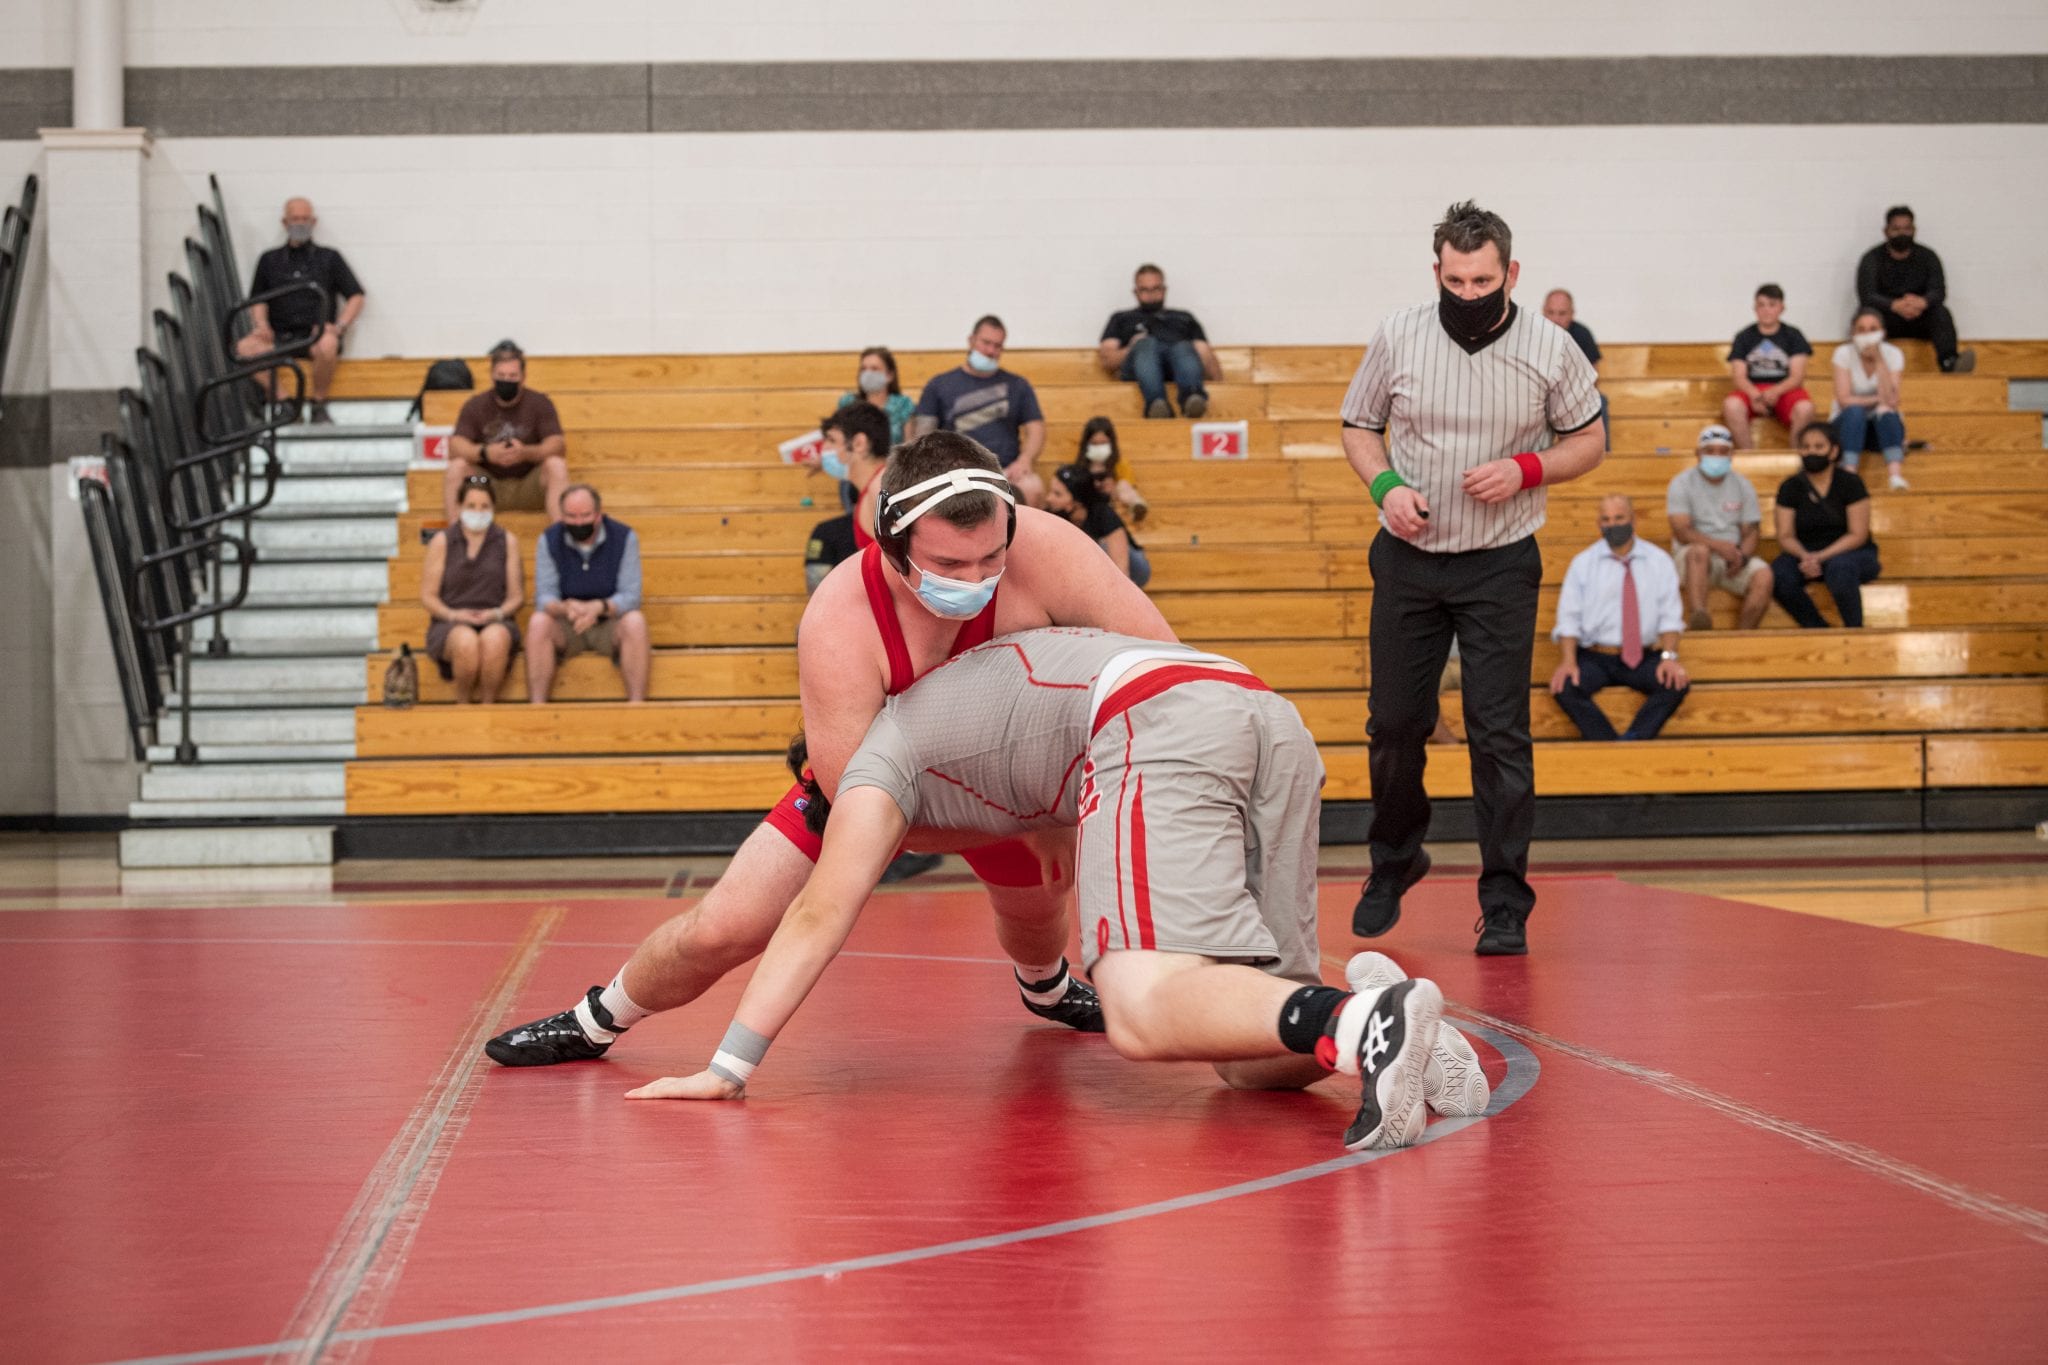 Senior Aiden Conroy (220) contiued the Harbormen's wins with another first period pin.  